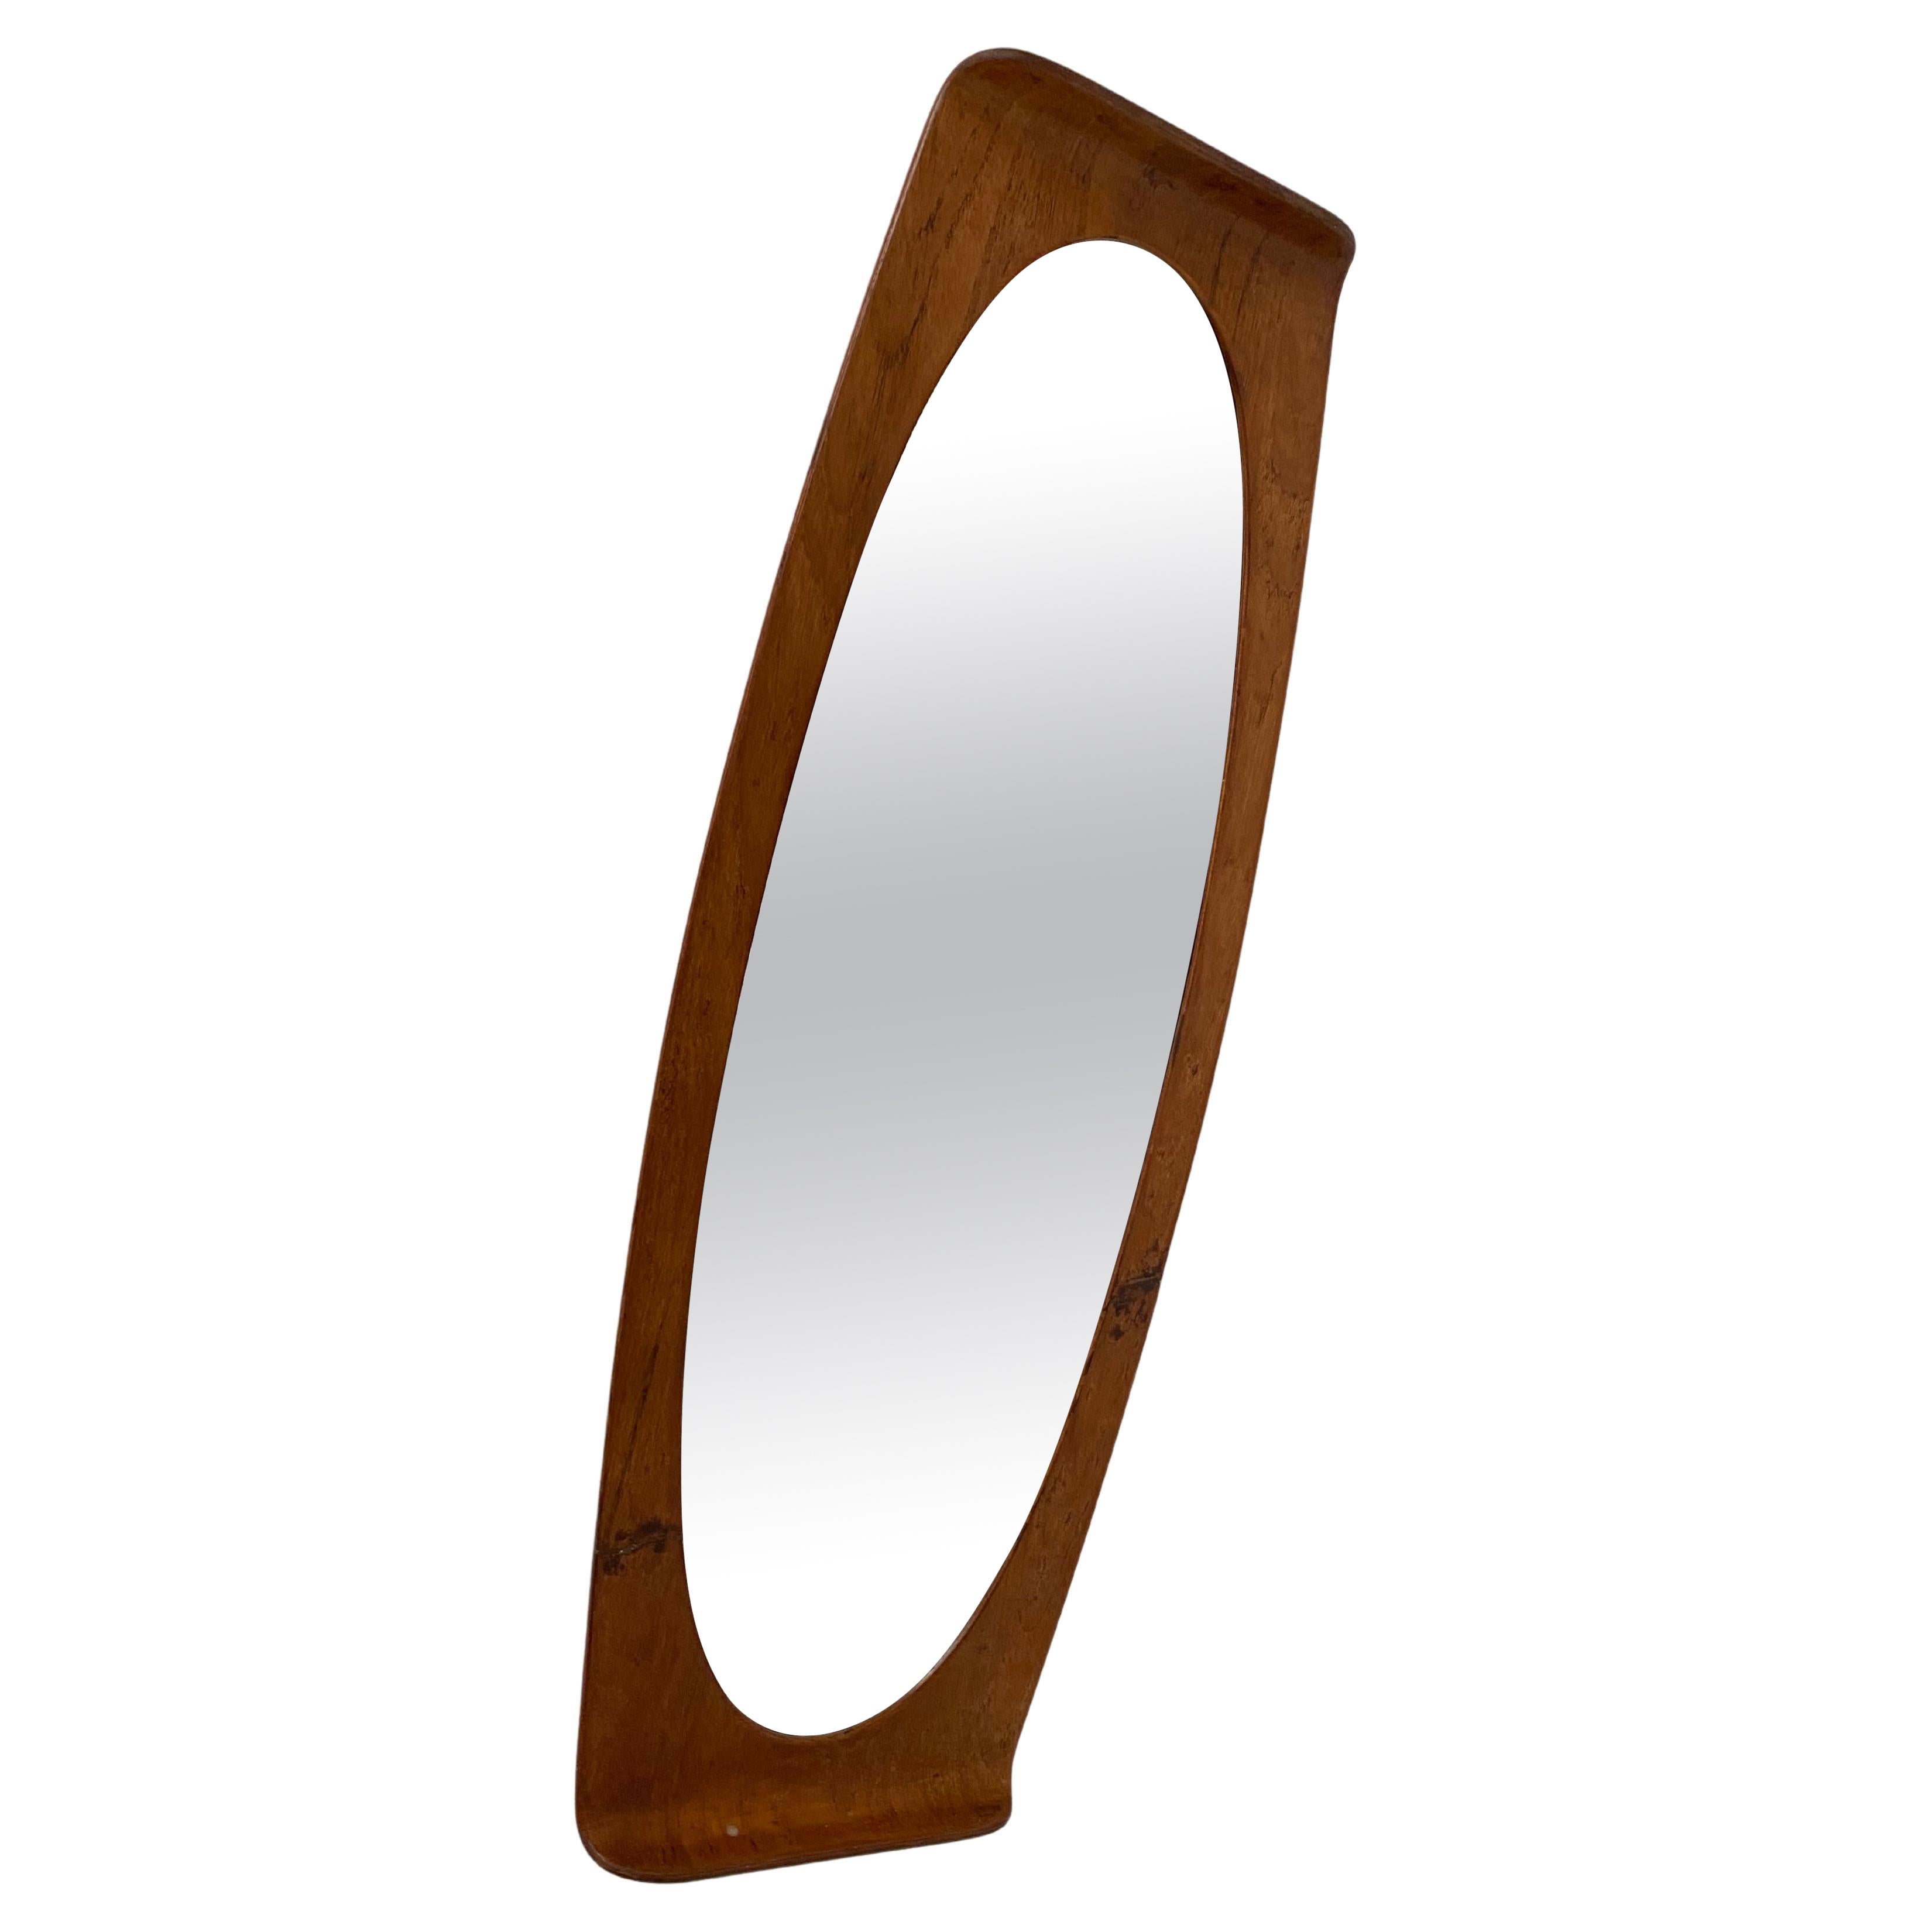 Campo & Graffi Wallmounted Teak Plywood Mirror for HOME Italy 1950's For Sale